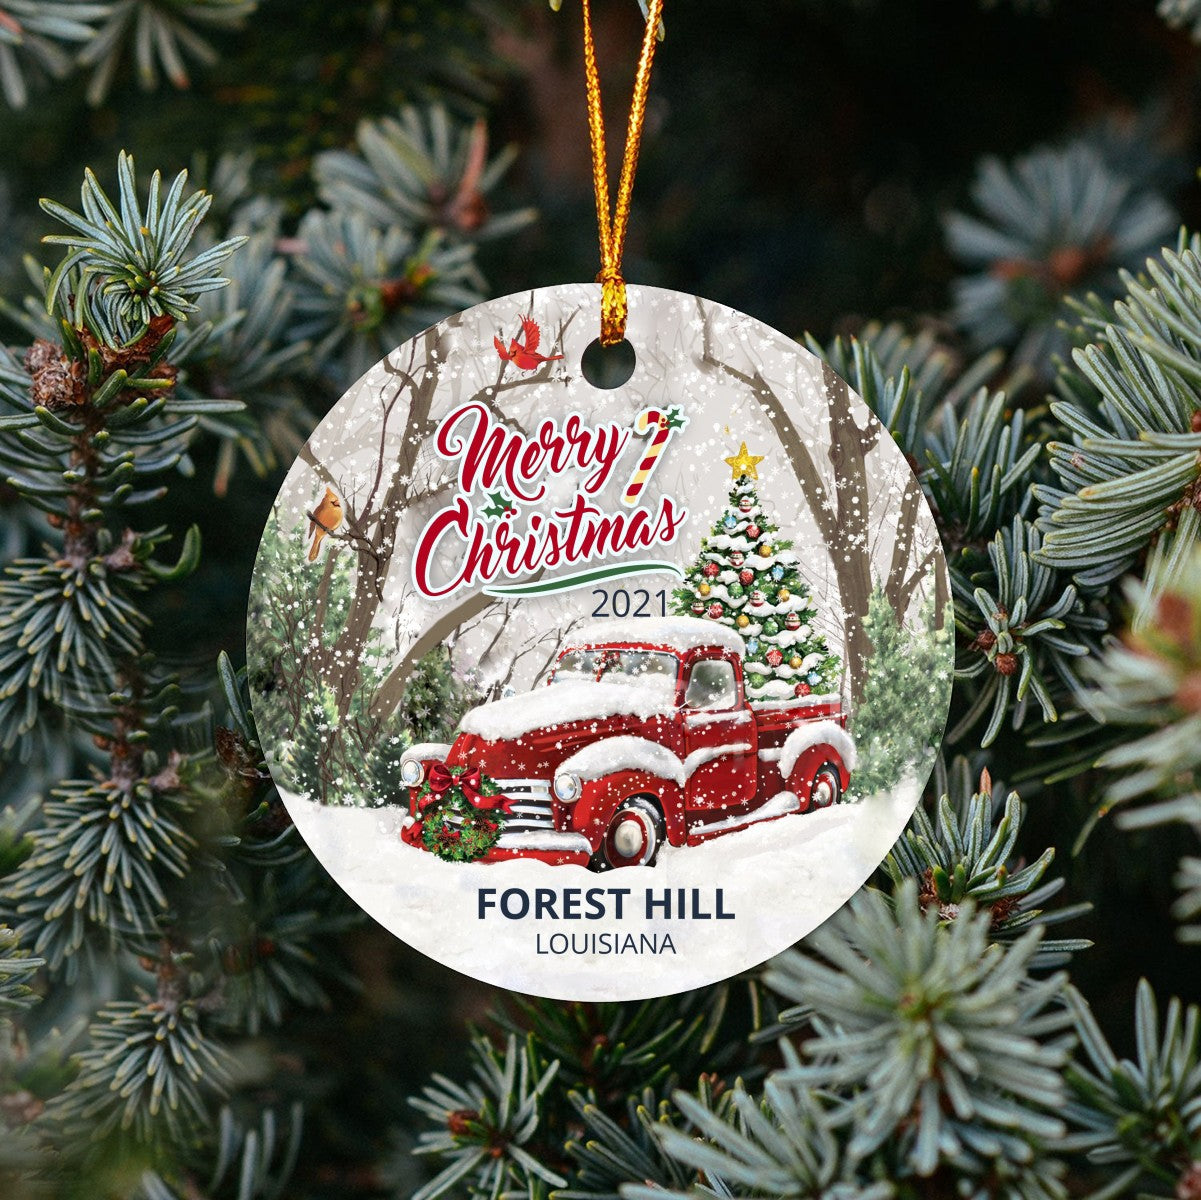 Christmas Tree Ornaments Forest Hill - Ornament With Name City, State Forest Hill Louisiana LA Ornament - Red Truck Xmas Ornaments 3'' Plastic Gift For Family, Friend And Housewarming